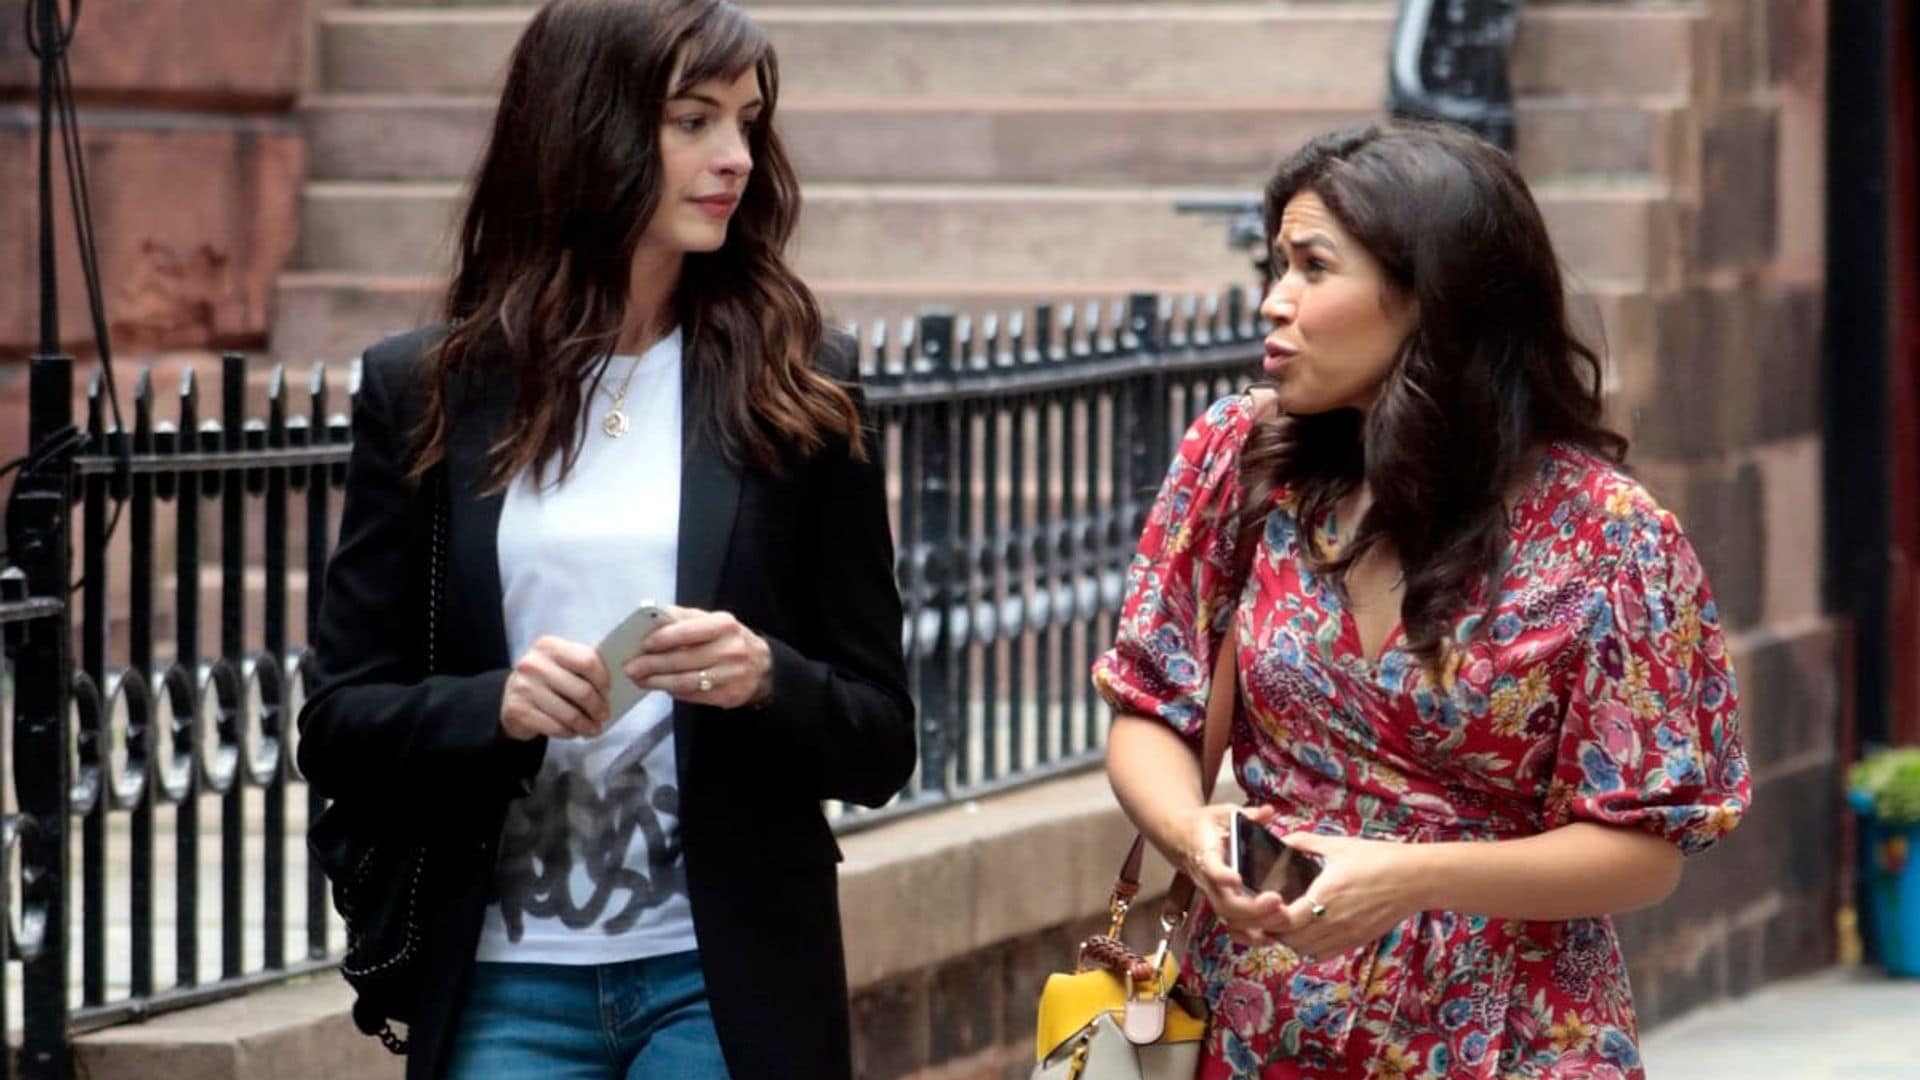 Anne Hathaway and America Ferrera look unrecognizable while filming their latest project in NYC